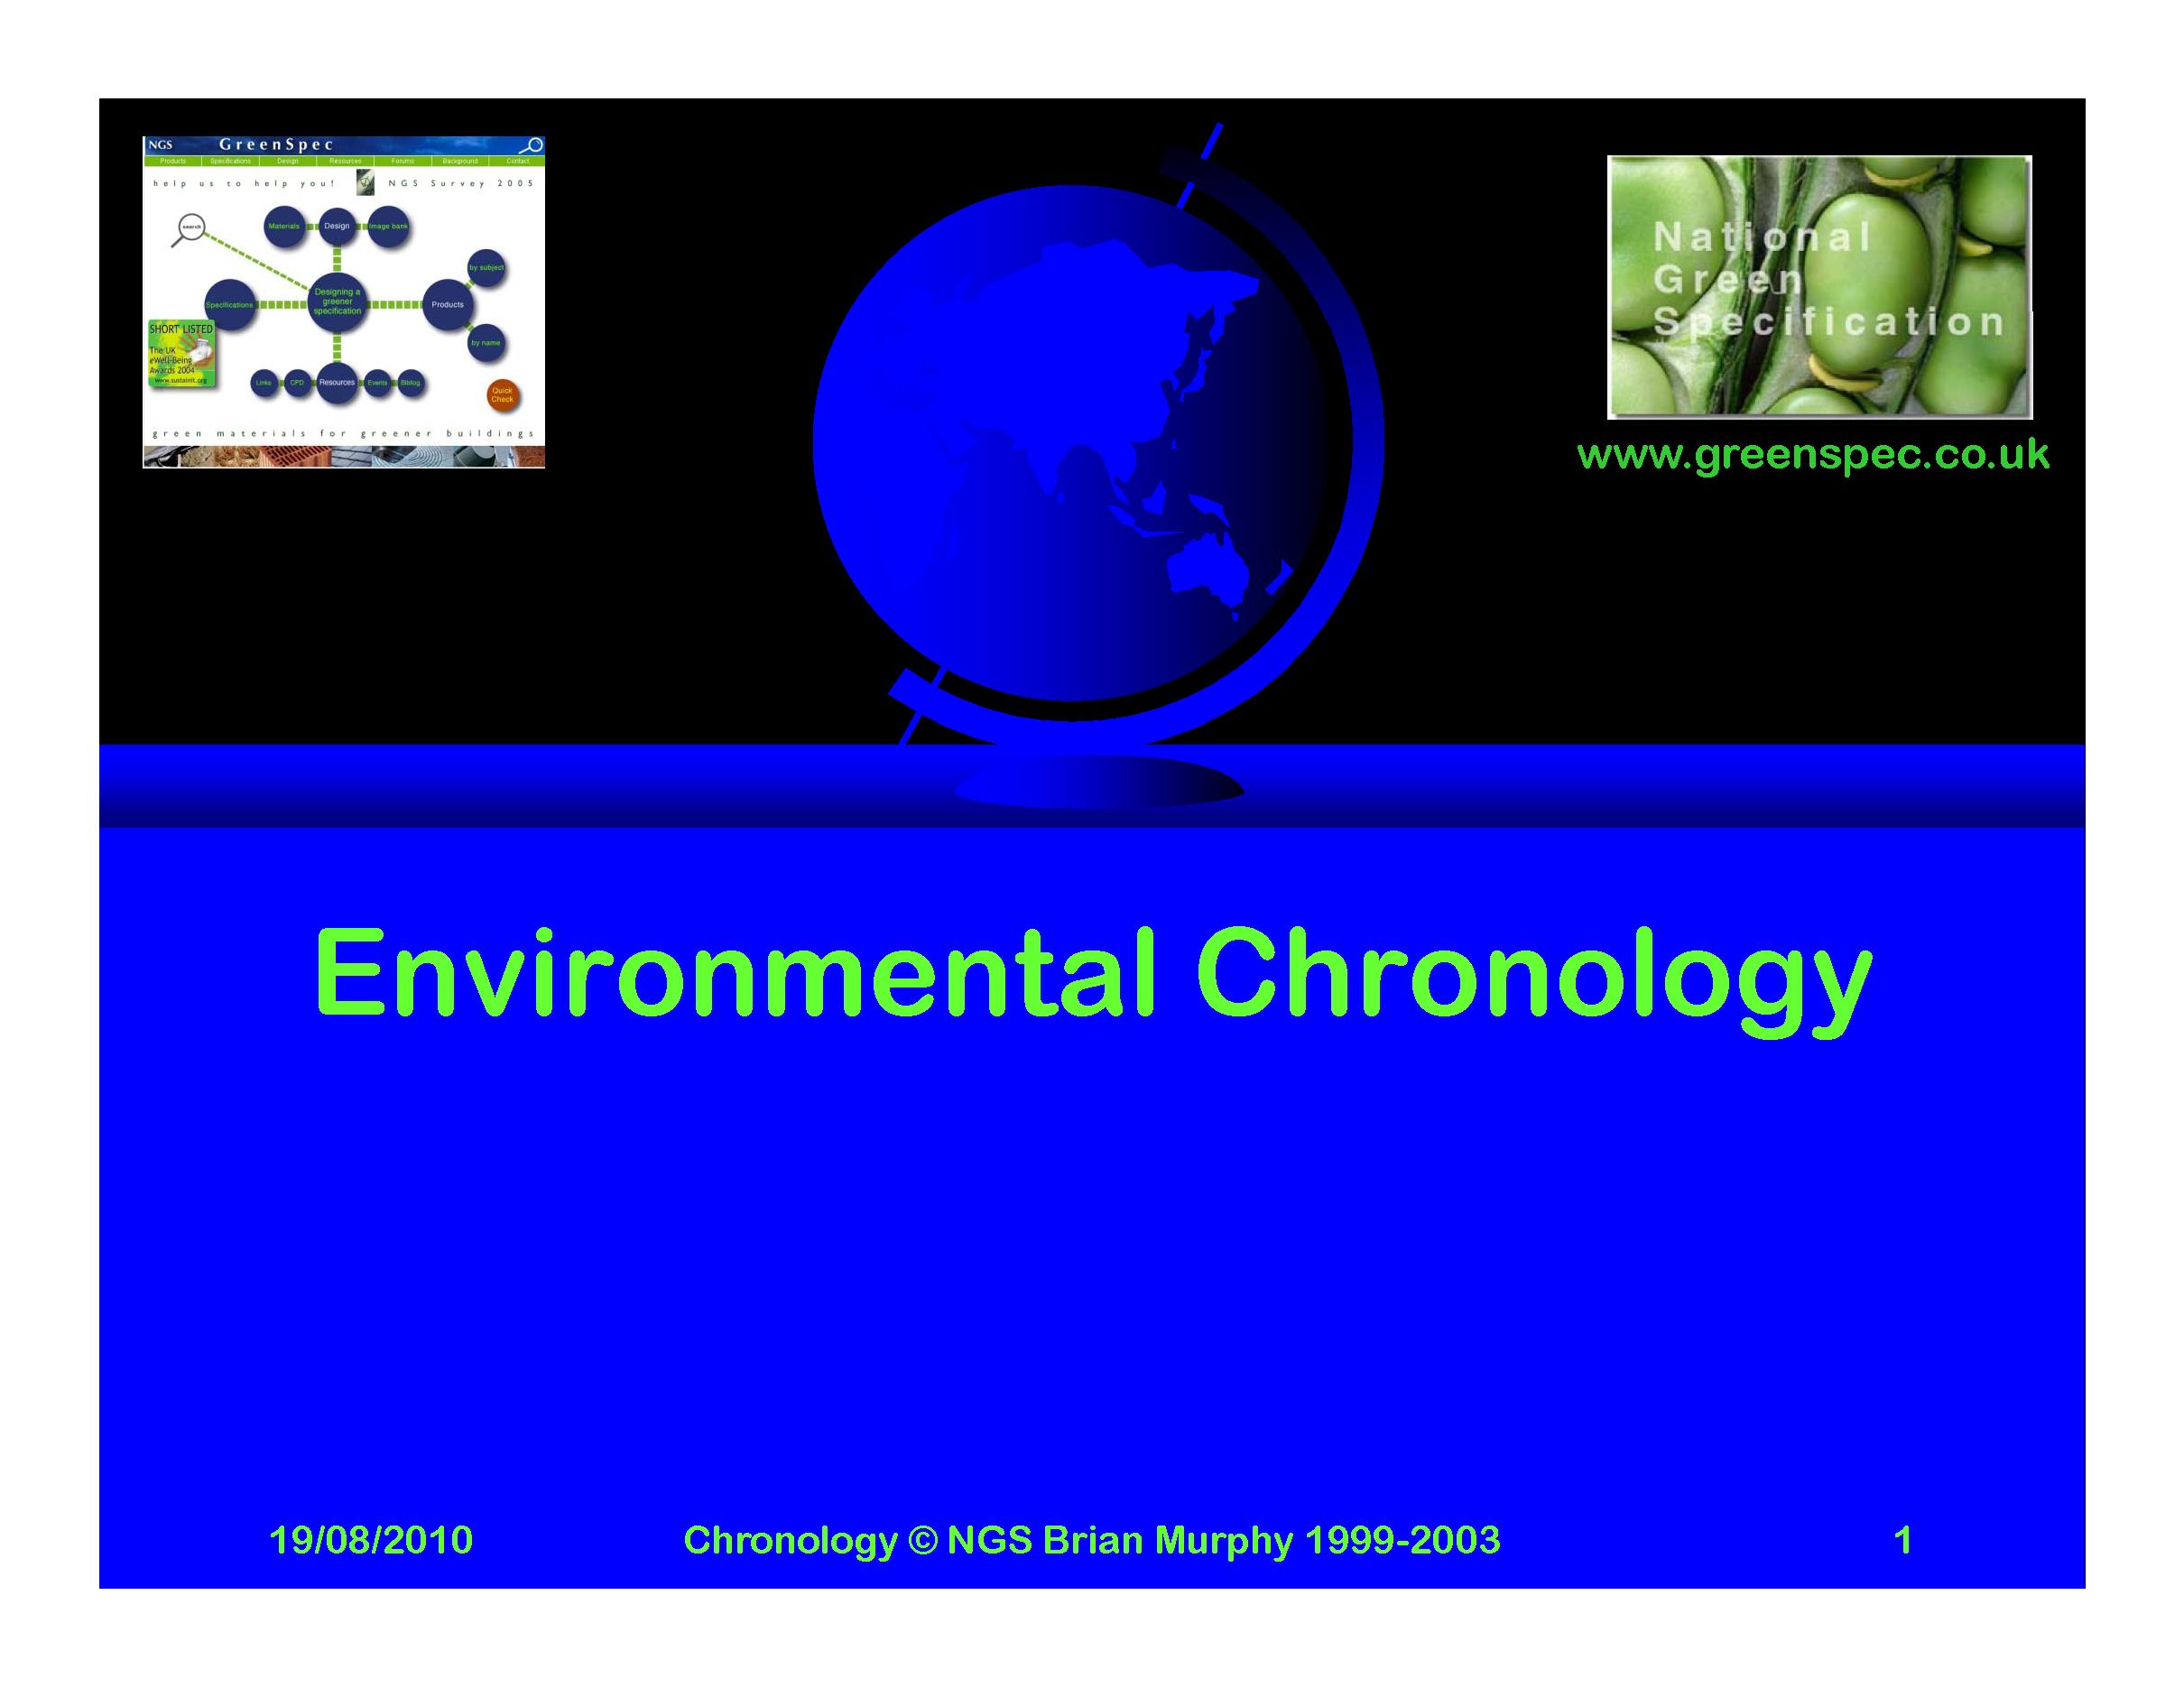 GBE CPD Environmental Chronology Cover